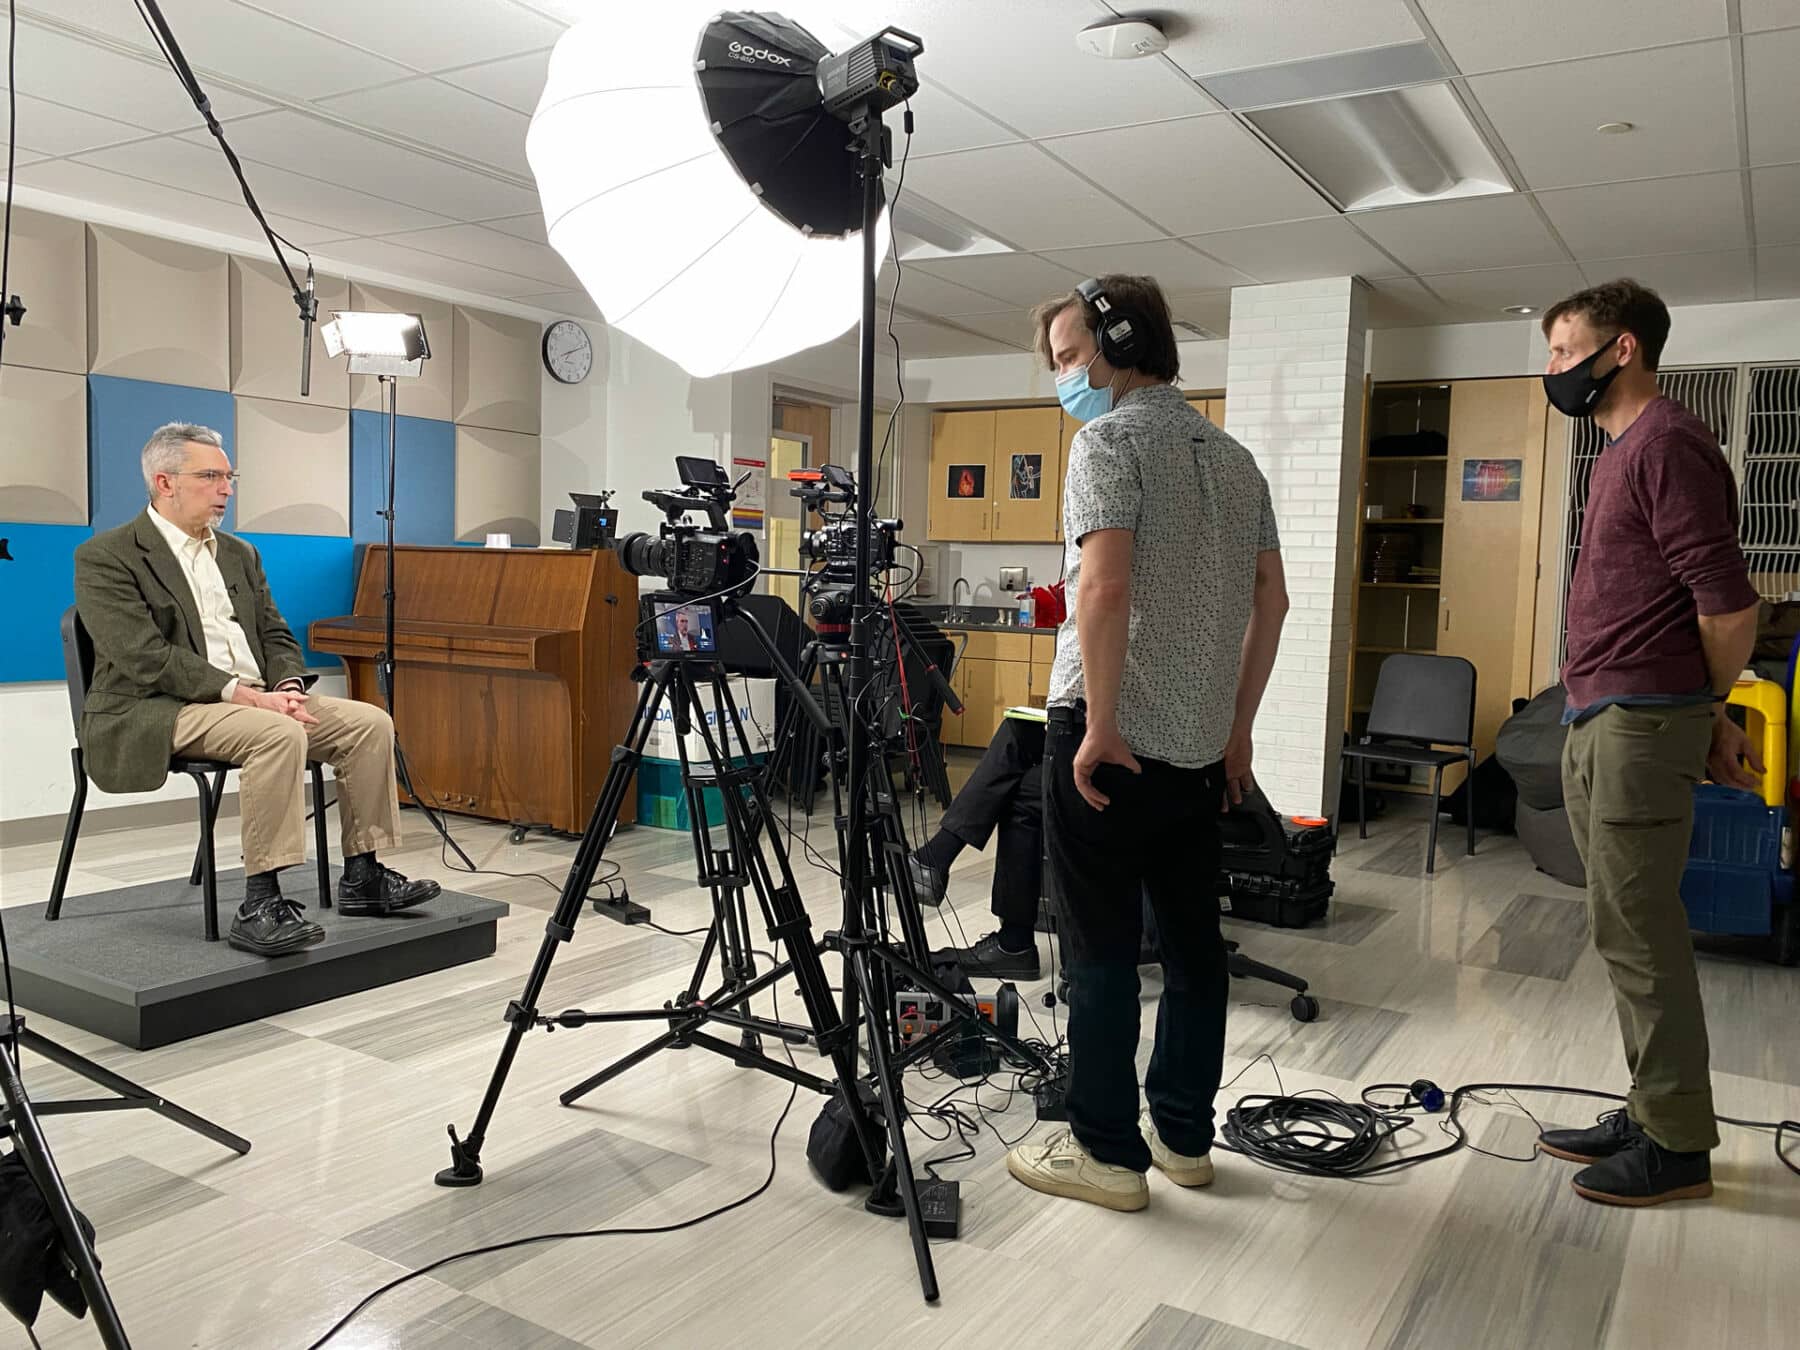 Matt and Kevin from Human Being Productions are providing production staffing services in the form of an interview. They are standing in front of cameras and lights, with a subject being interviewed in front of them.